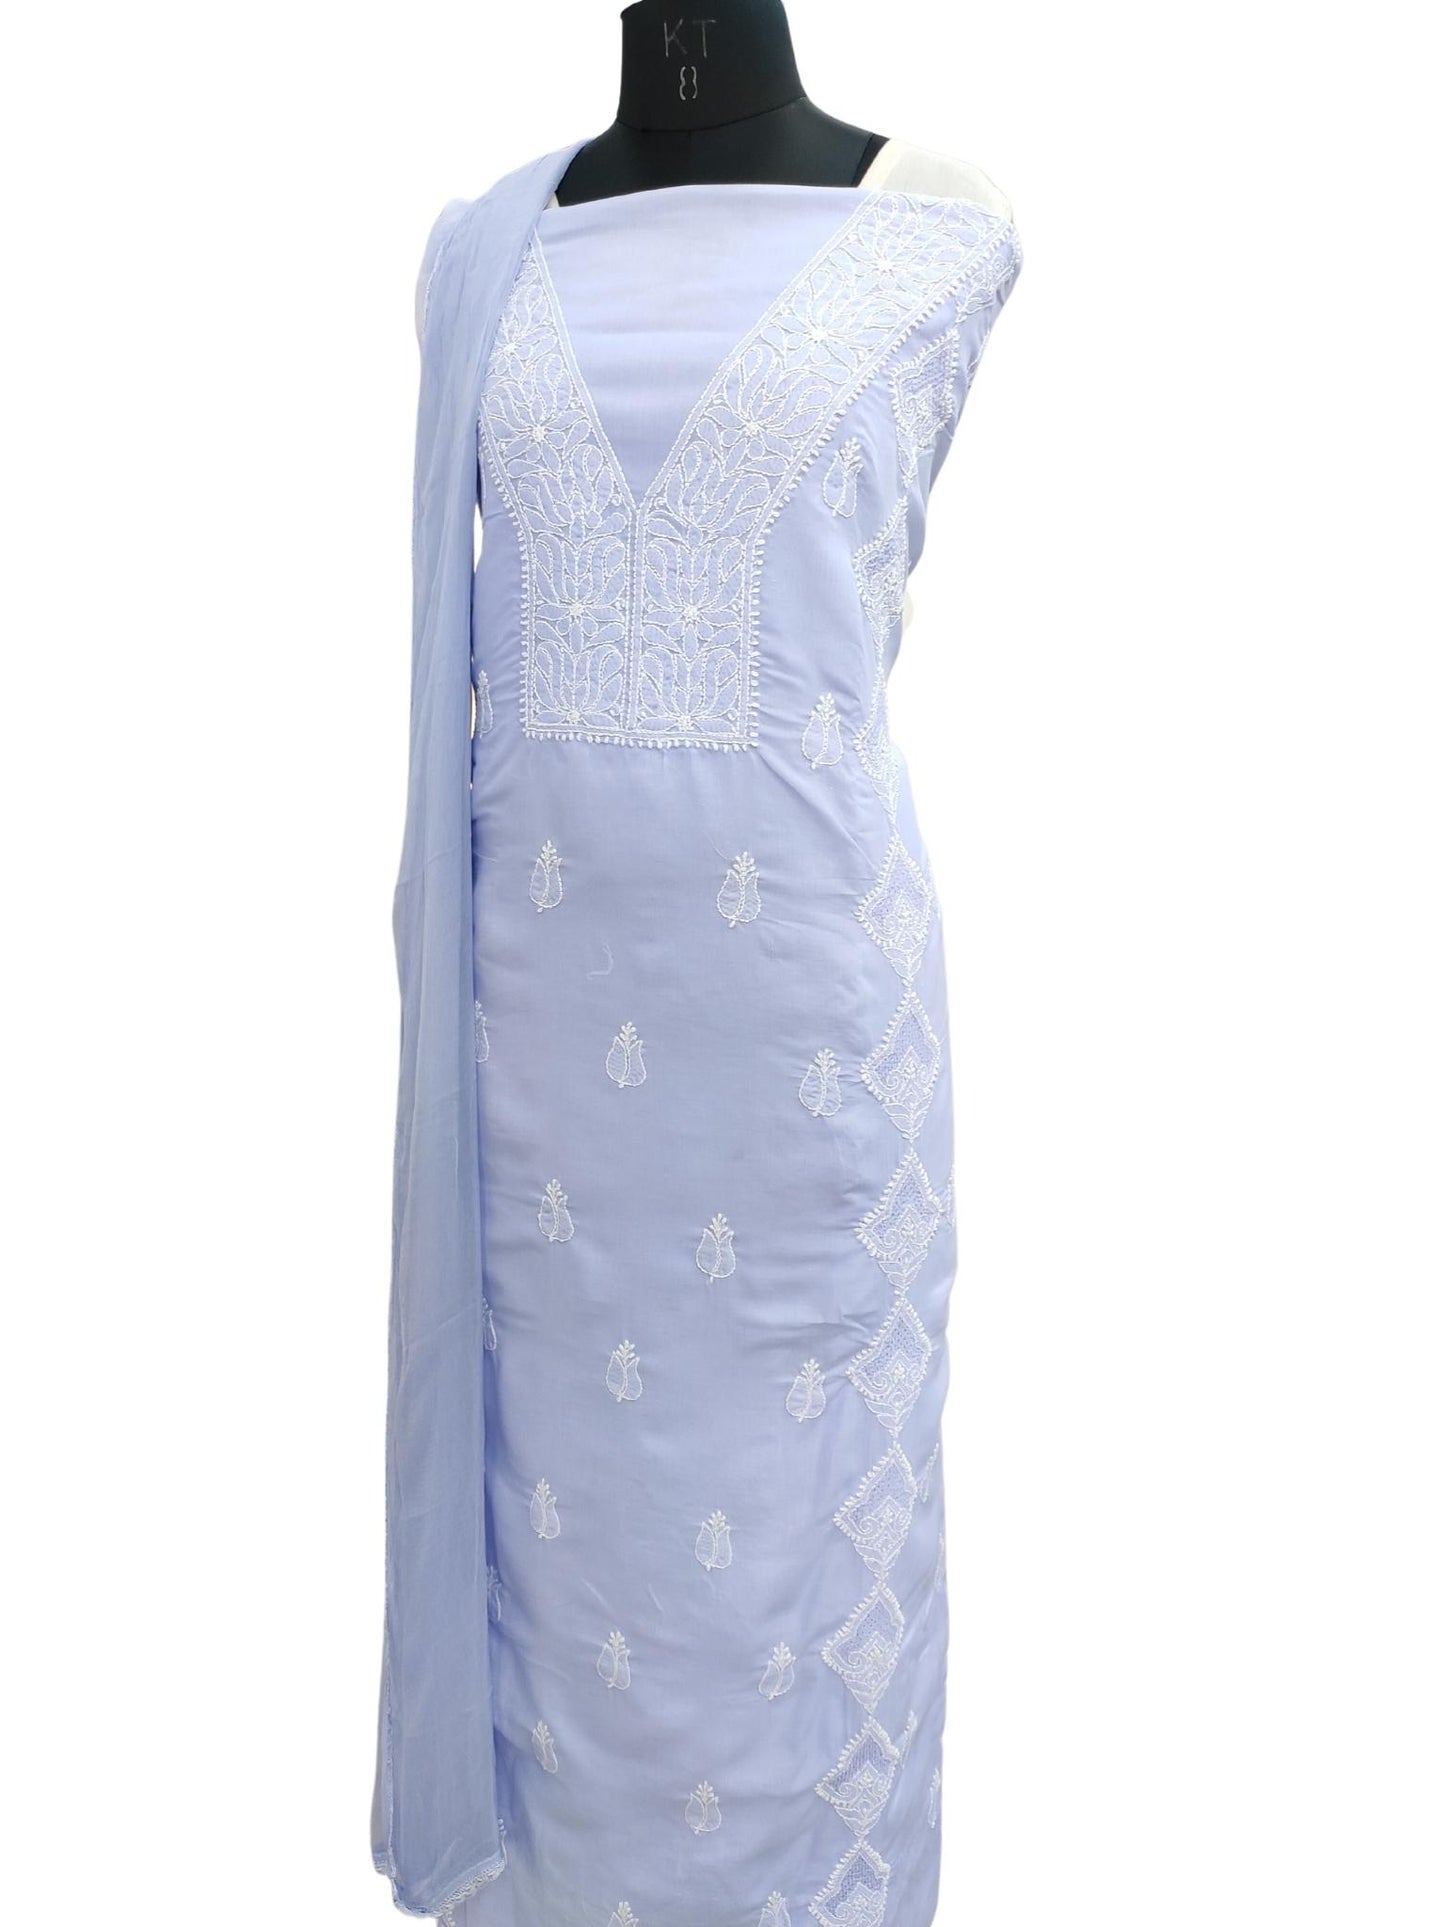 Shyamal Chikan Hand Embroidered Lavender Cotton Lucknowi Chikankari Unstitched Suit Piece With Jaali Work - S19284